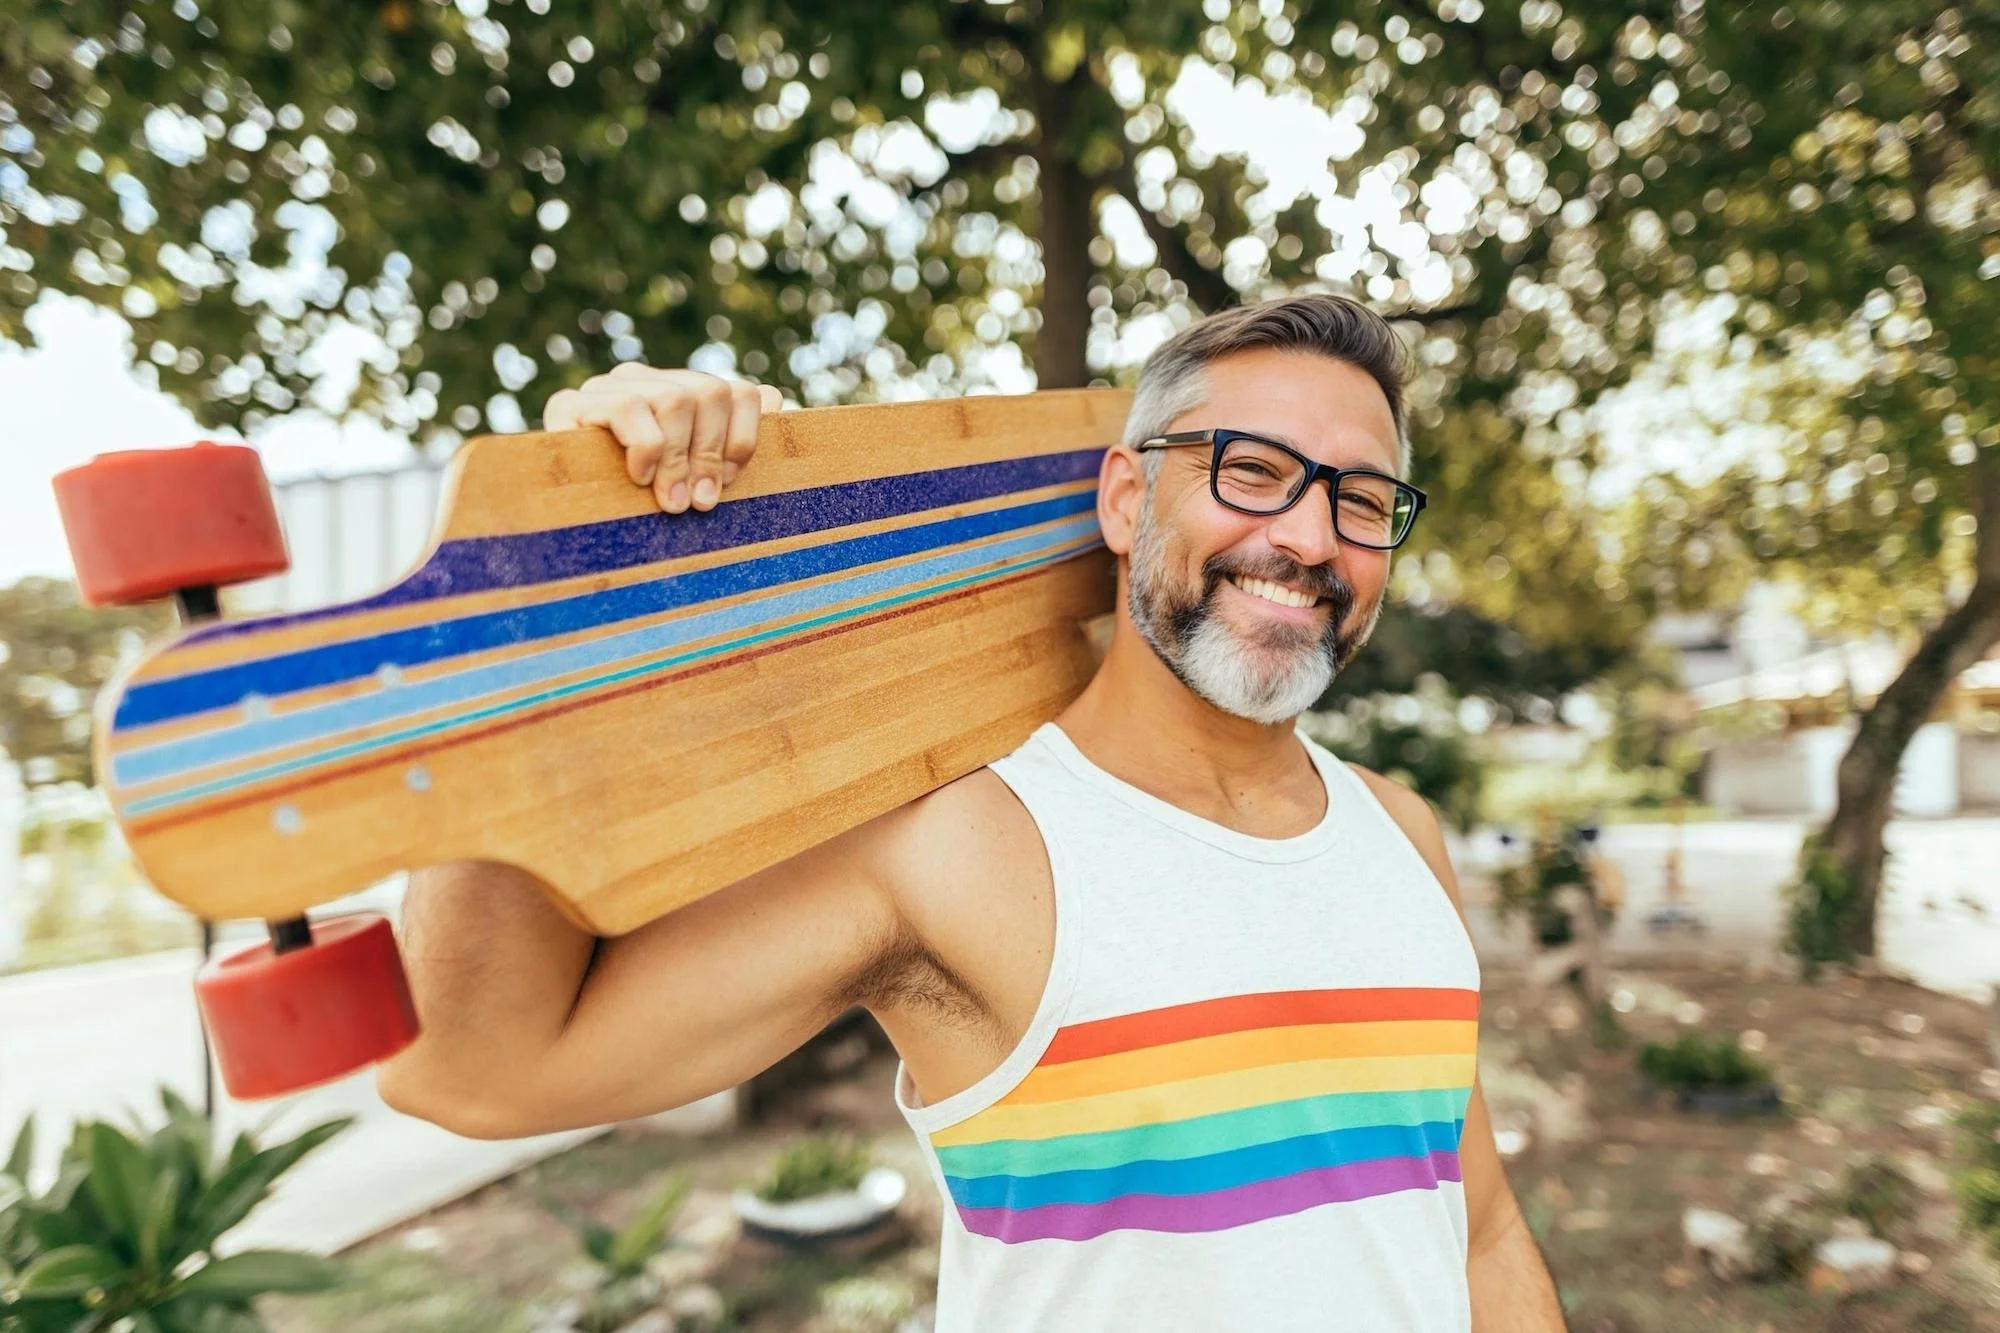 A cheerful man with white beard and hair and wearing glasses carries a longboard over his shoulder in a park. The face including beard, hair and glasses was AI-generated by EraseID.